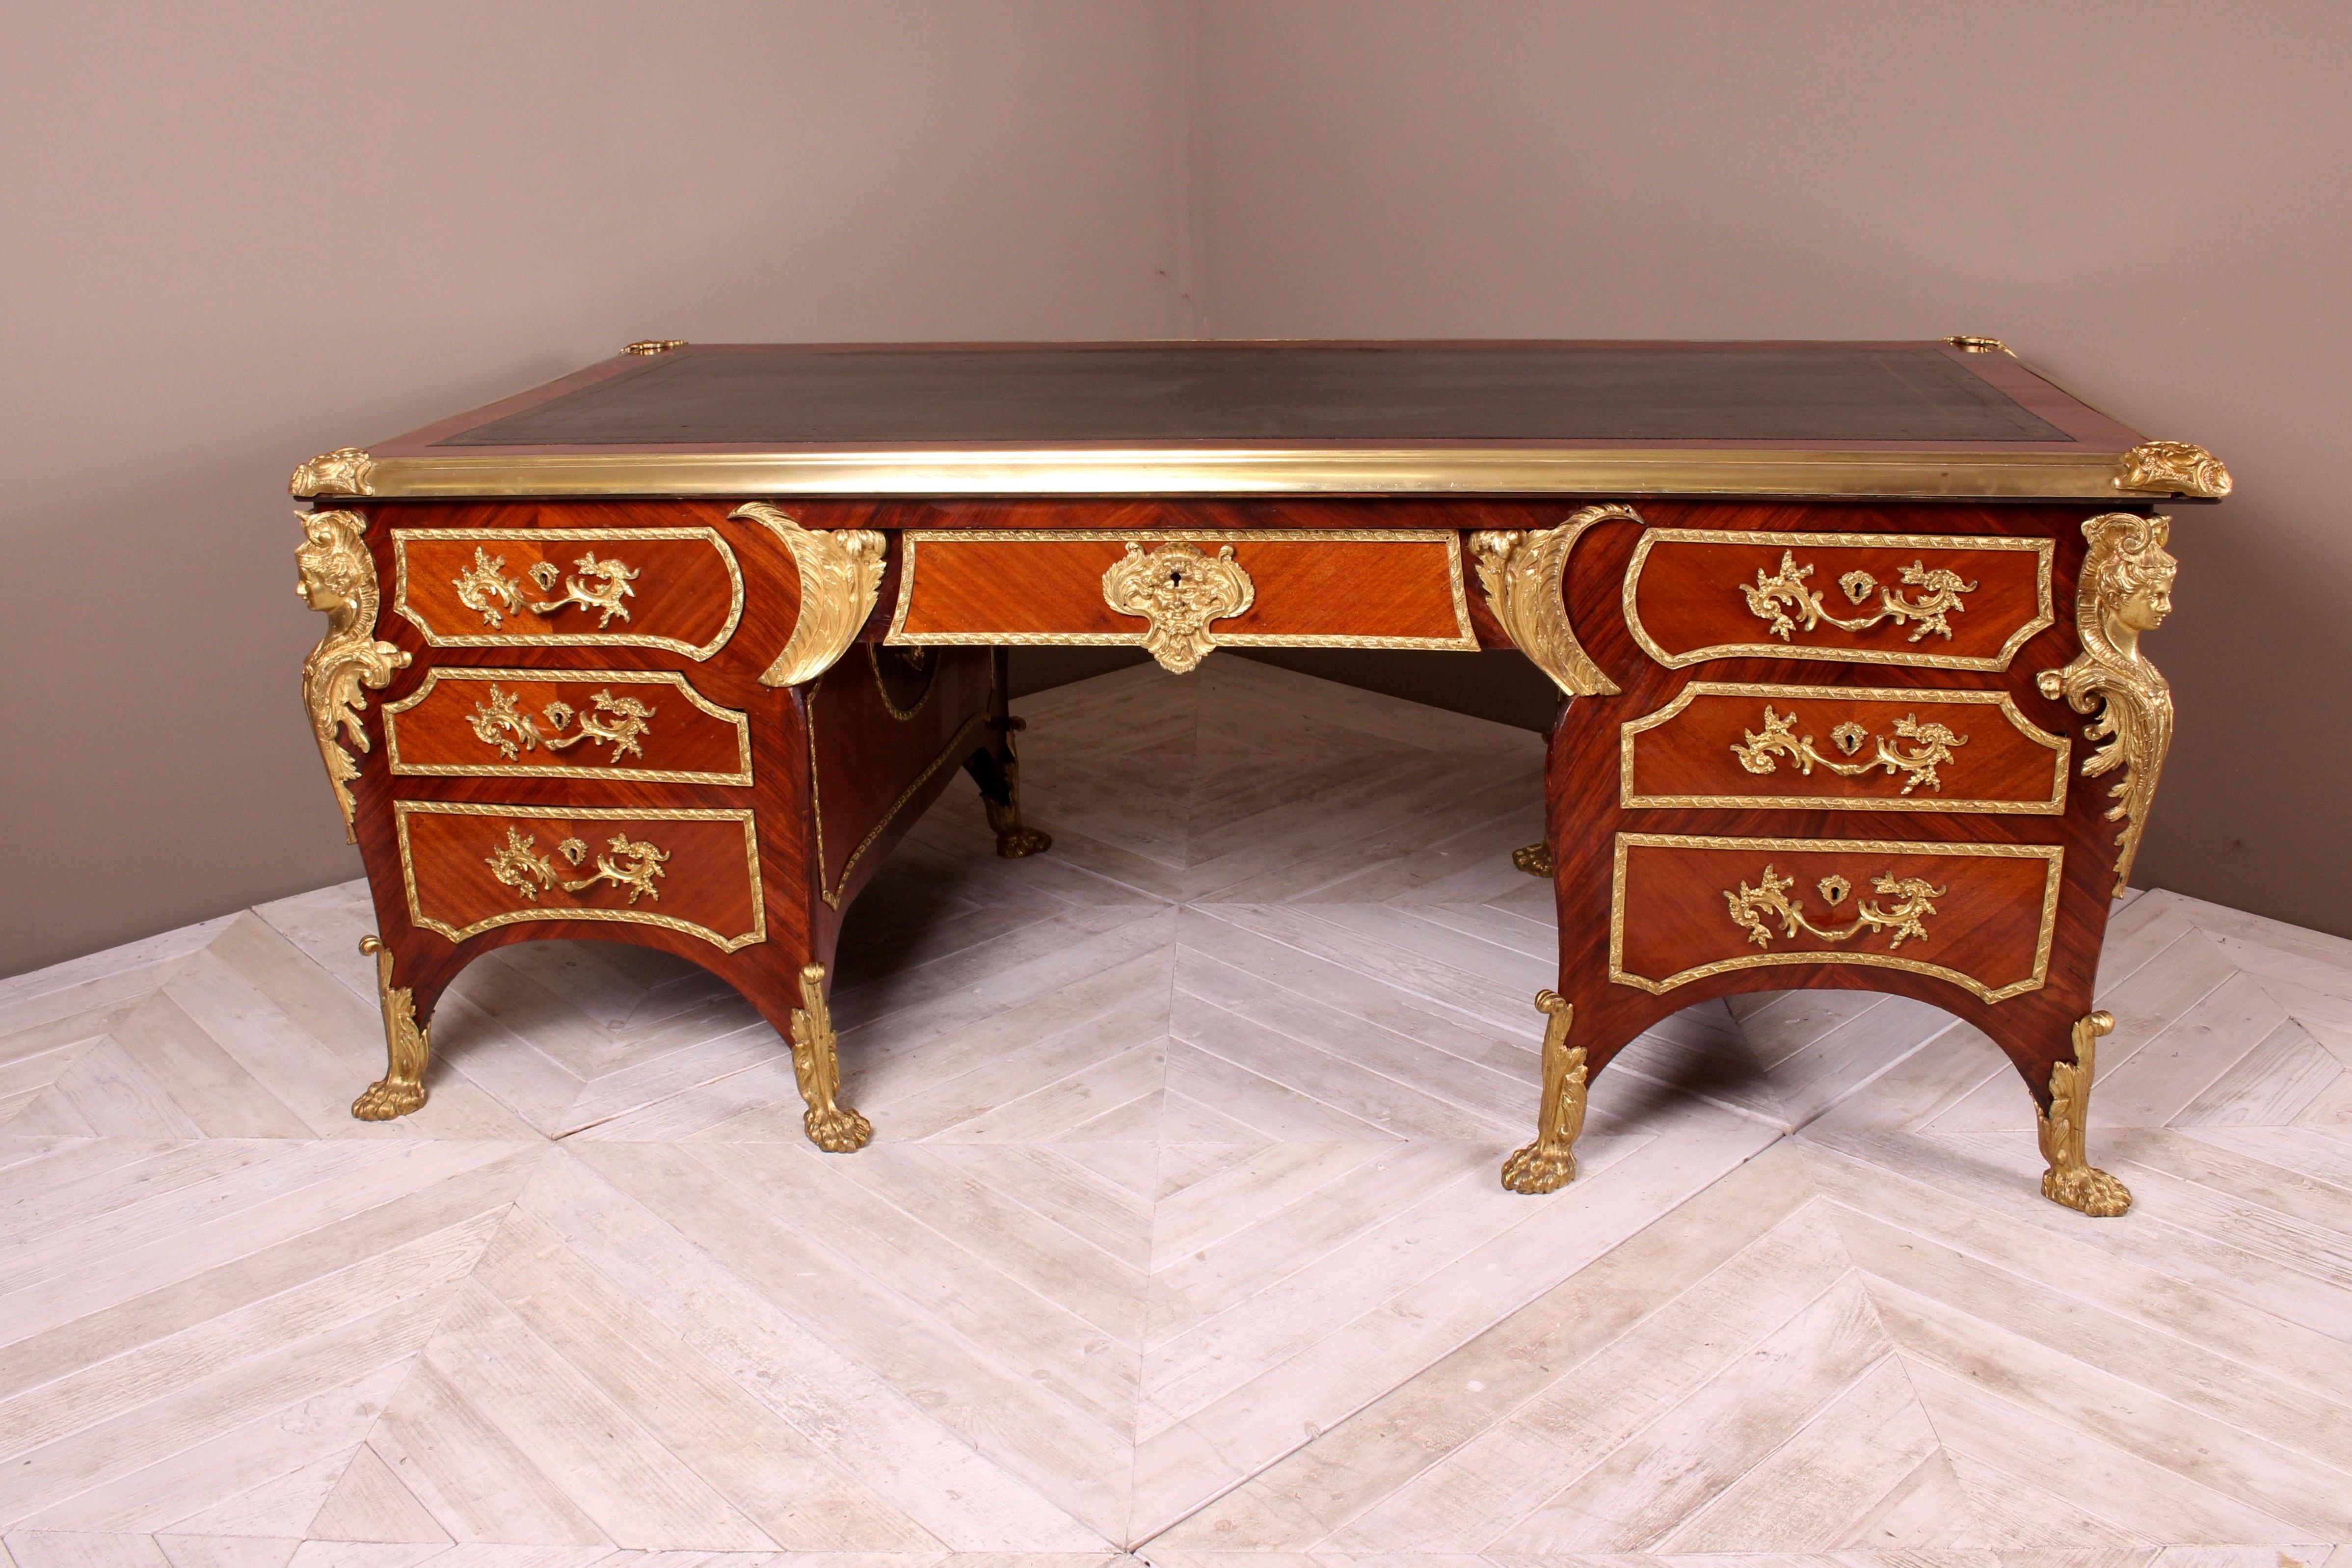 A fine French kingwood and ormolu-mounted bureau plat by the renowned and luxury Parisian furnishers, Au Gros Chene, Paris. Having gilt-tooled leather top framed with timber crossbanding and gilt bronze mounts to each corner. Below is a large